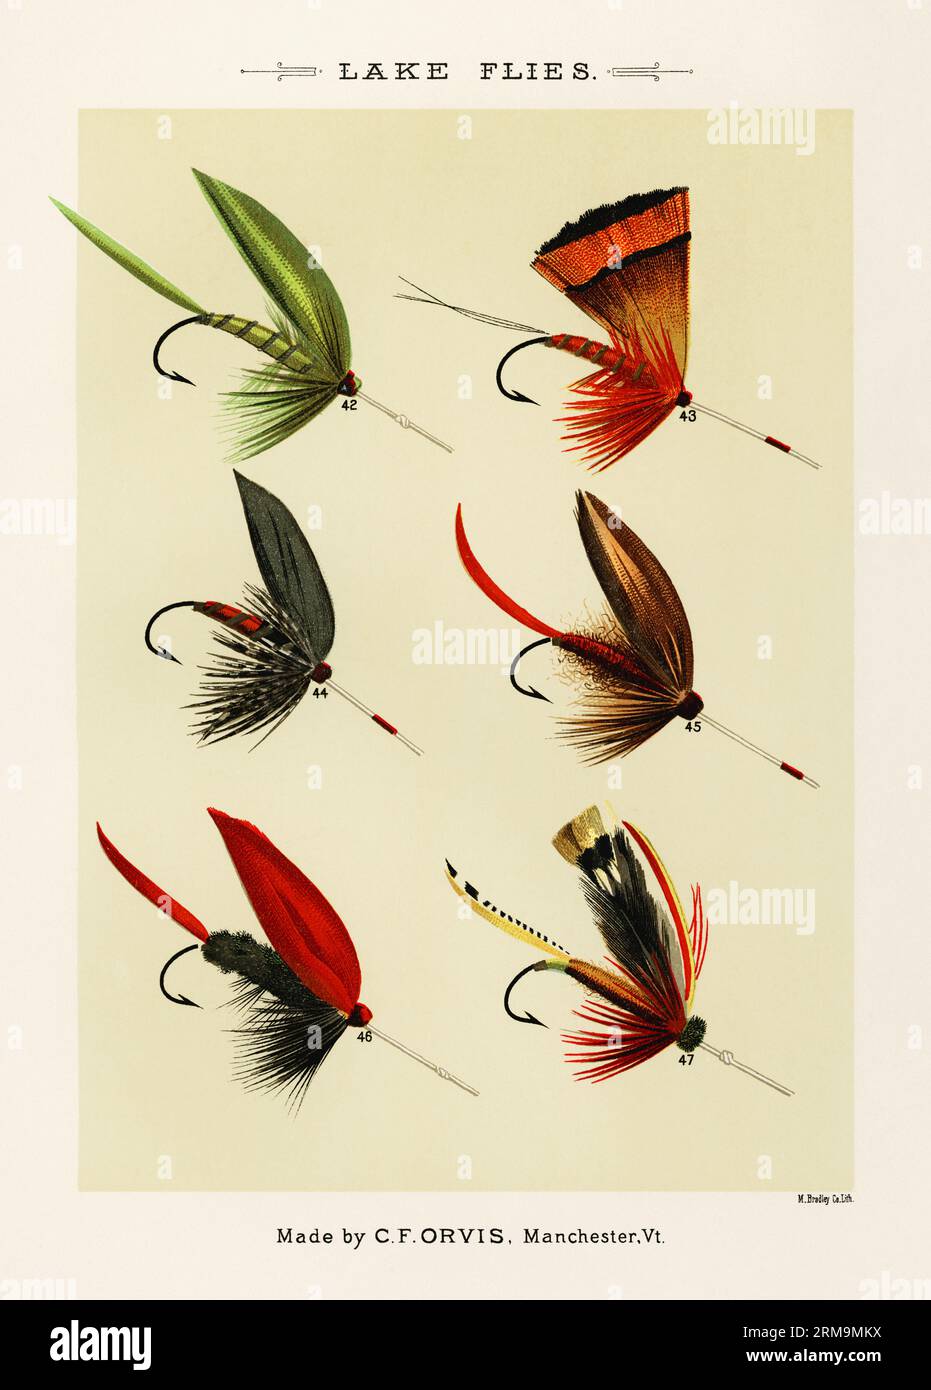 https://c8.alamy.com/comp/2RM9MKX/vintage-illustration-of-fly-fishing-hooks-assorted-barbed-fly-hooks-with-different-sizes-and-eyelets-for-artificial-fly-patterns-in-fly-fishing-ca-2RM9MKX.jpg